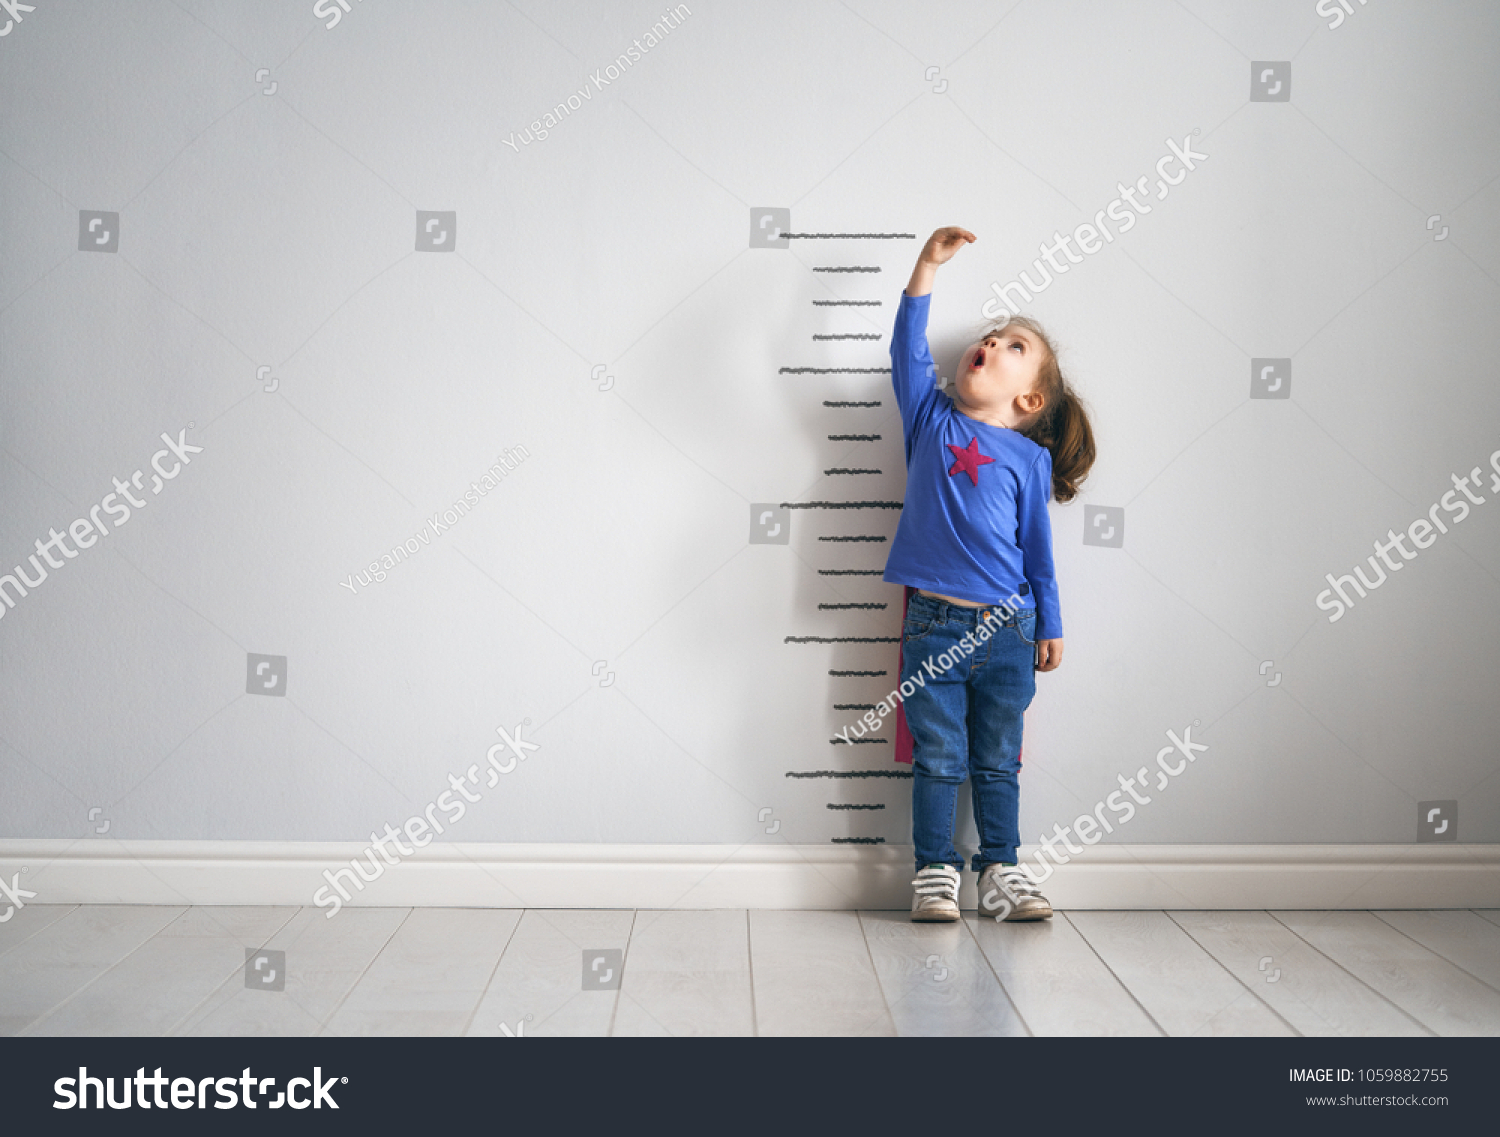 Little child is playing superhero. Kid is measuring the growth on the background of wall. Girl power concept.  #1059882755